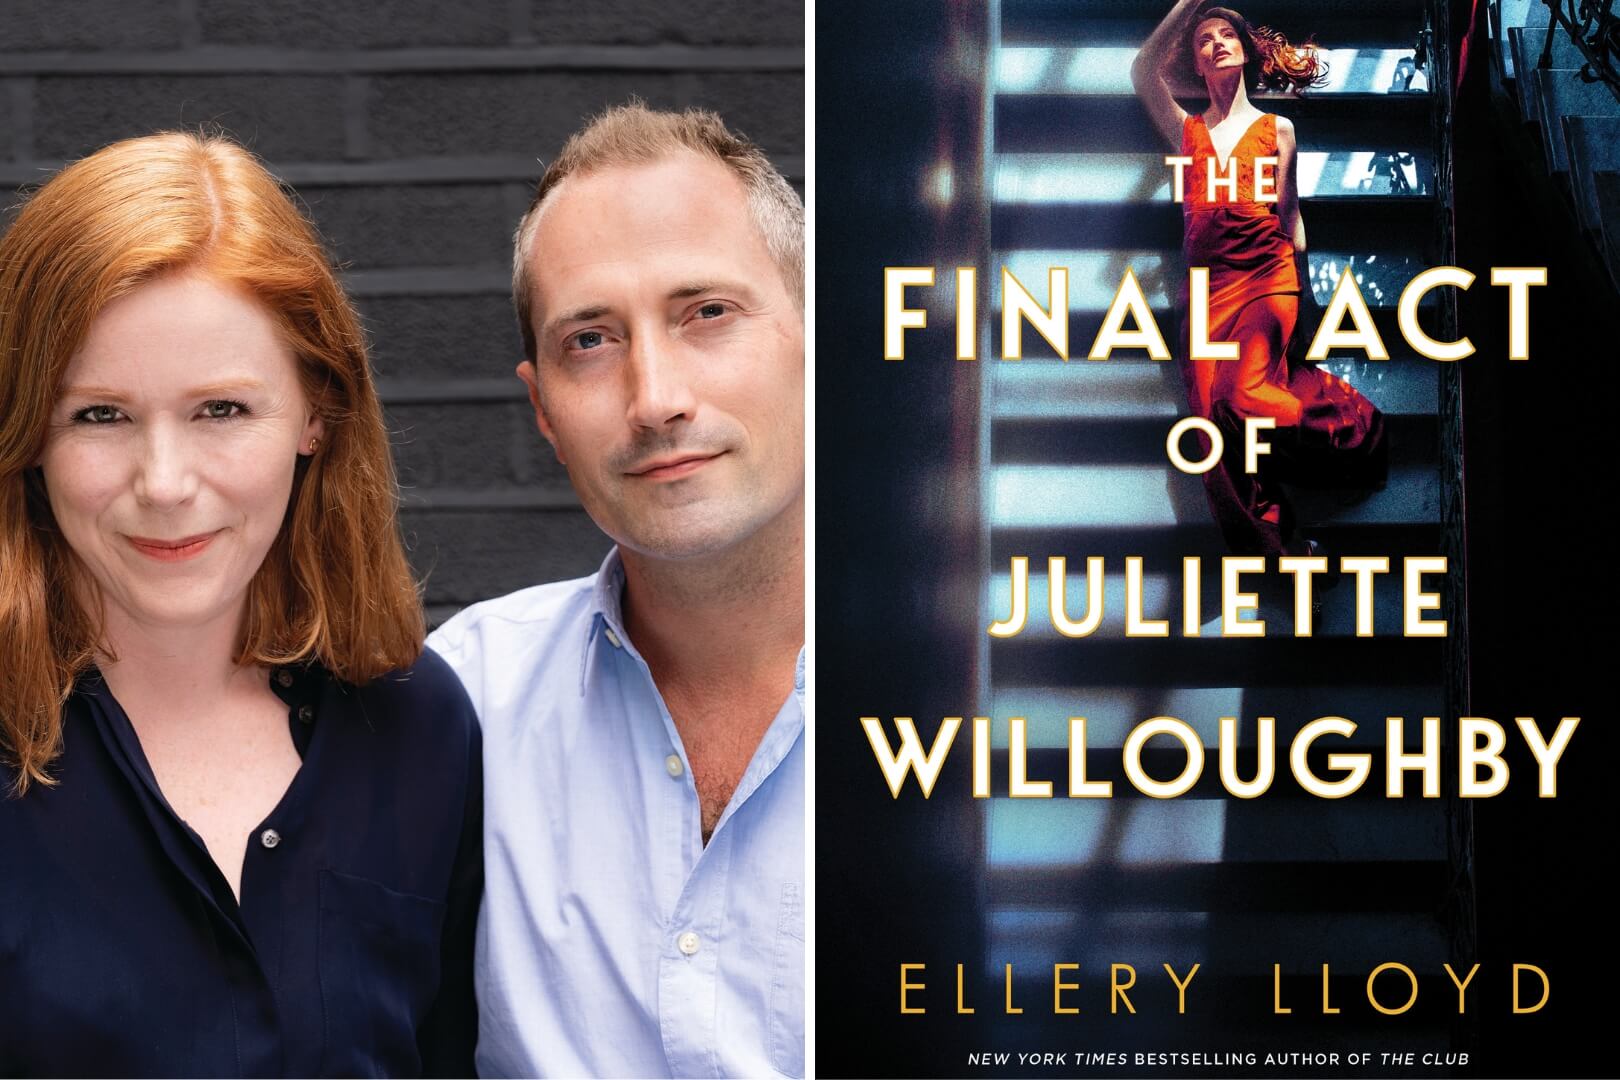 Q&A with Ellery Lloyd, Authors of The Final Act of Juliette Willoughby